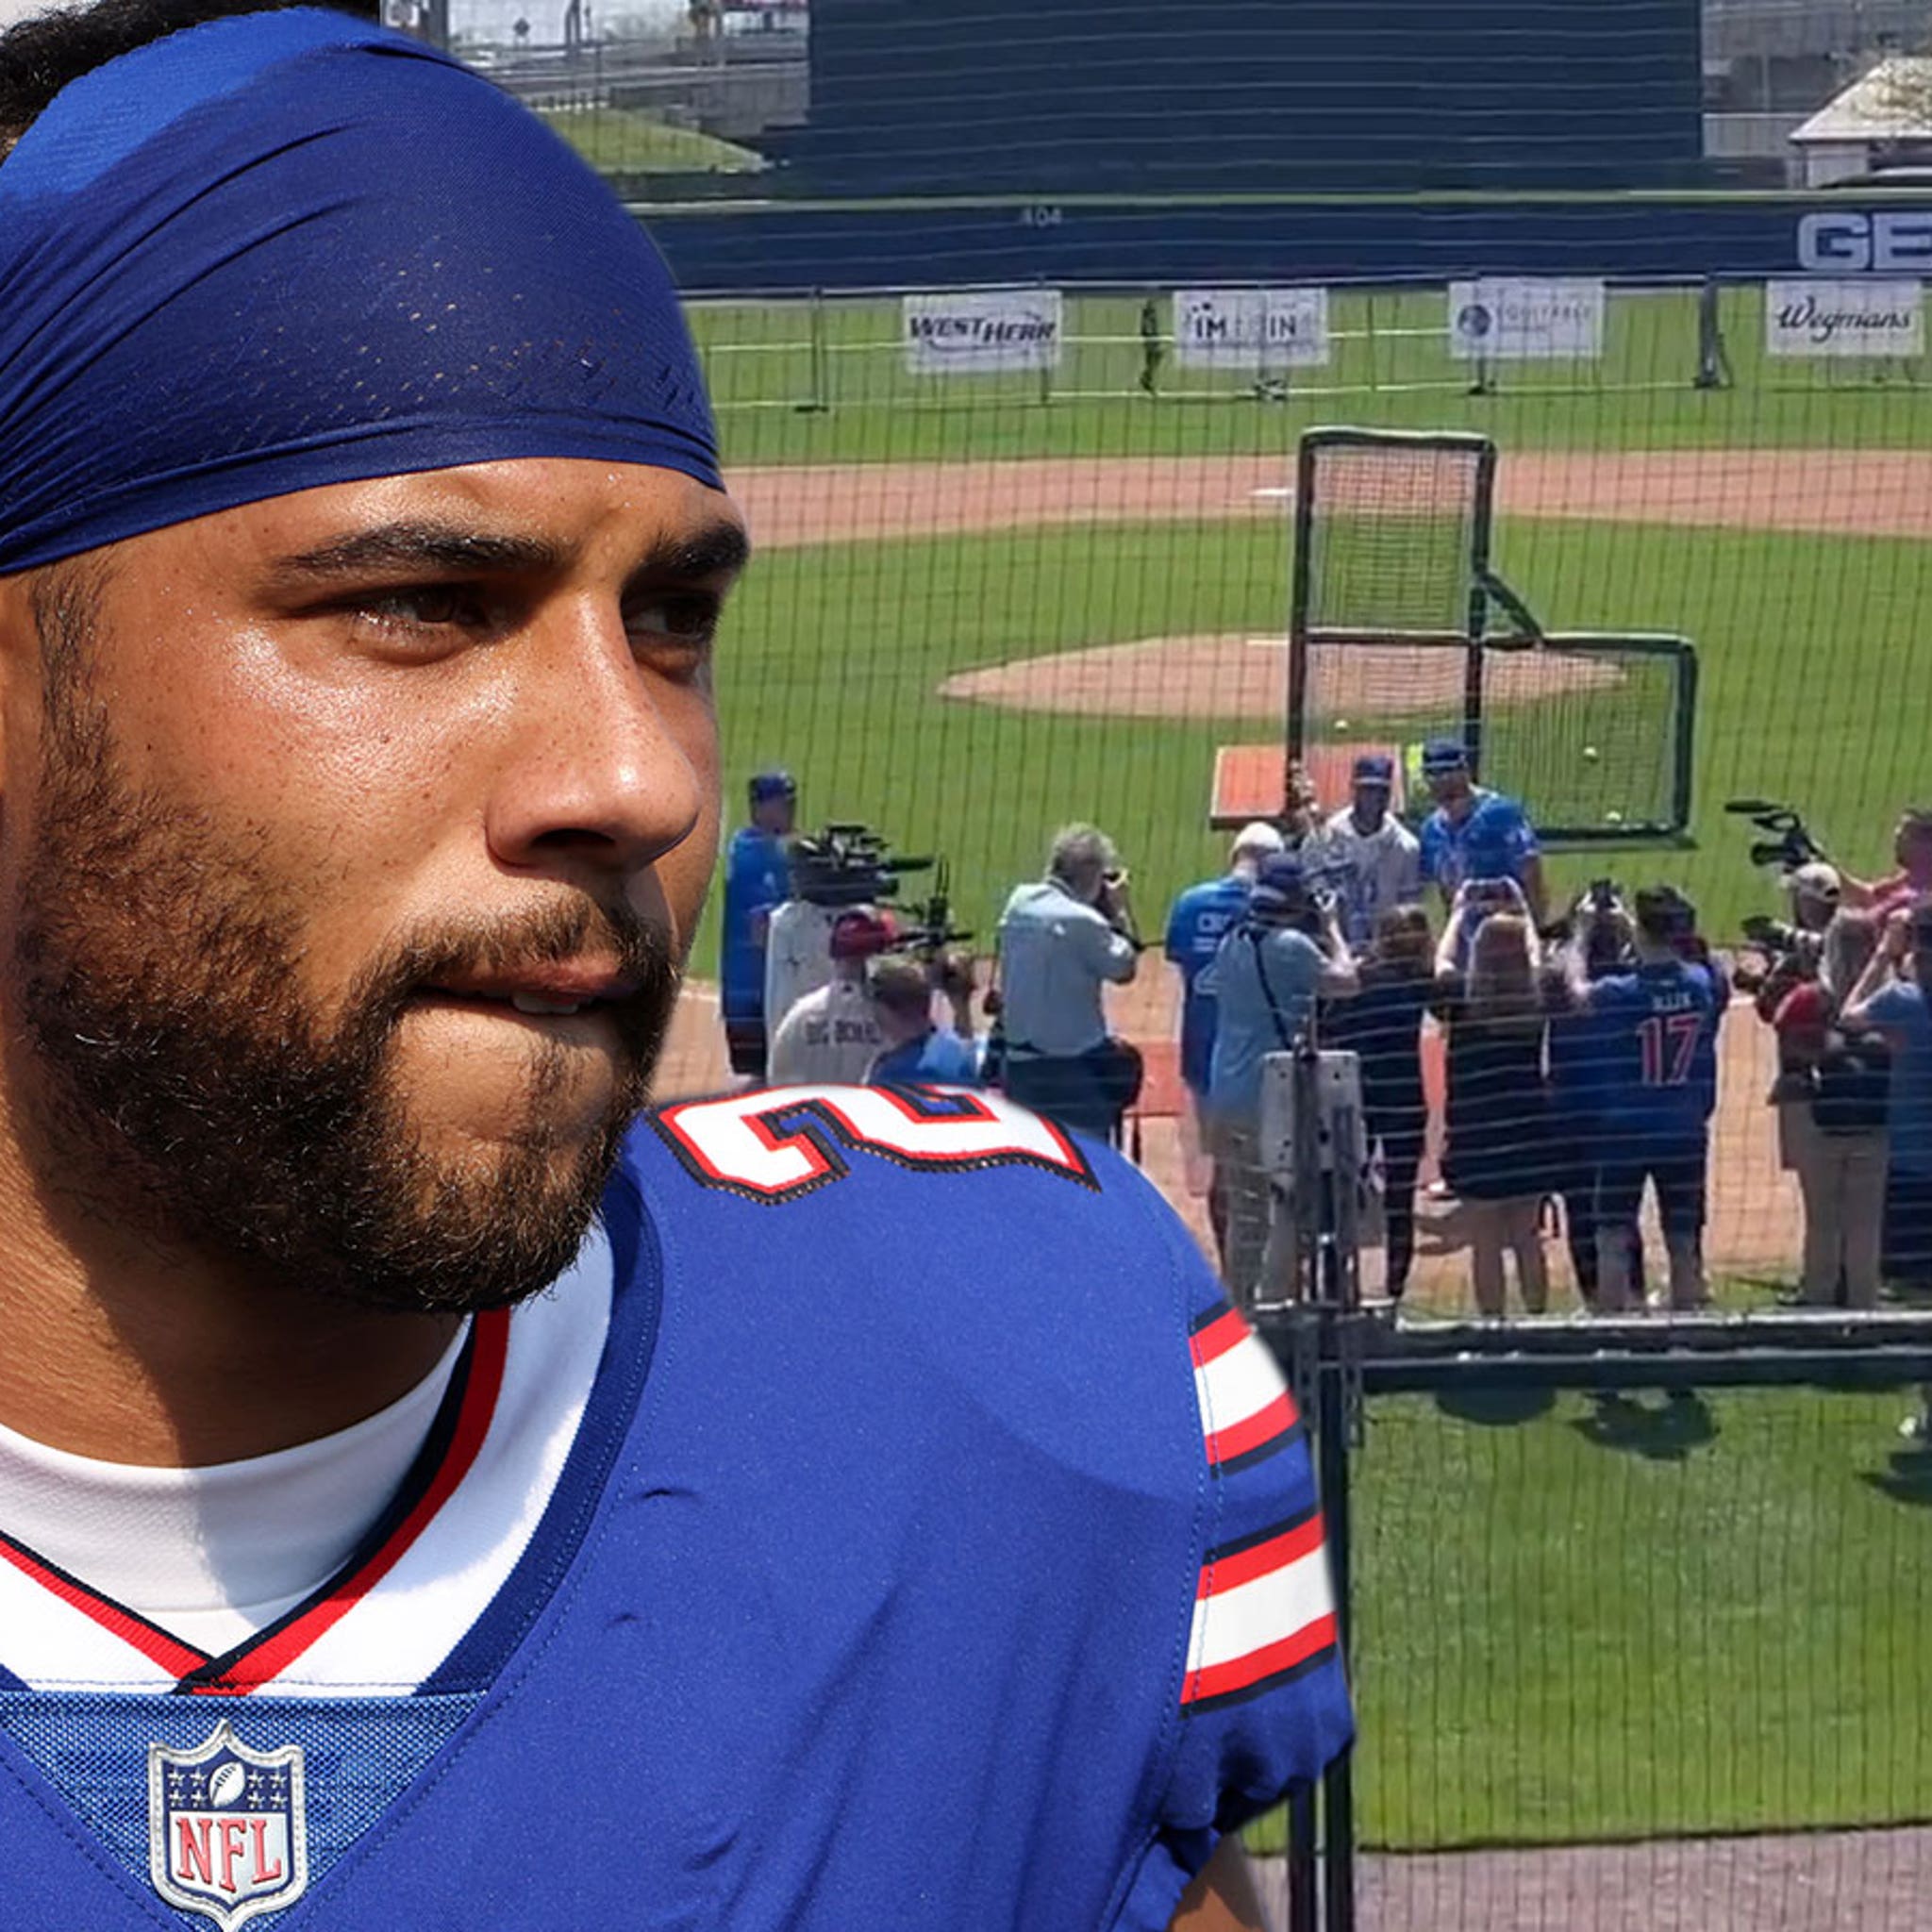 Micah Hyde to Donate Charity Softball Proceeds in Support of Shooting  Victims - Sports Illustrated